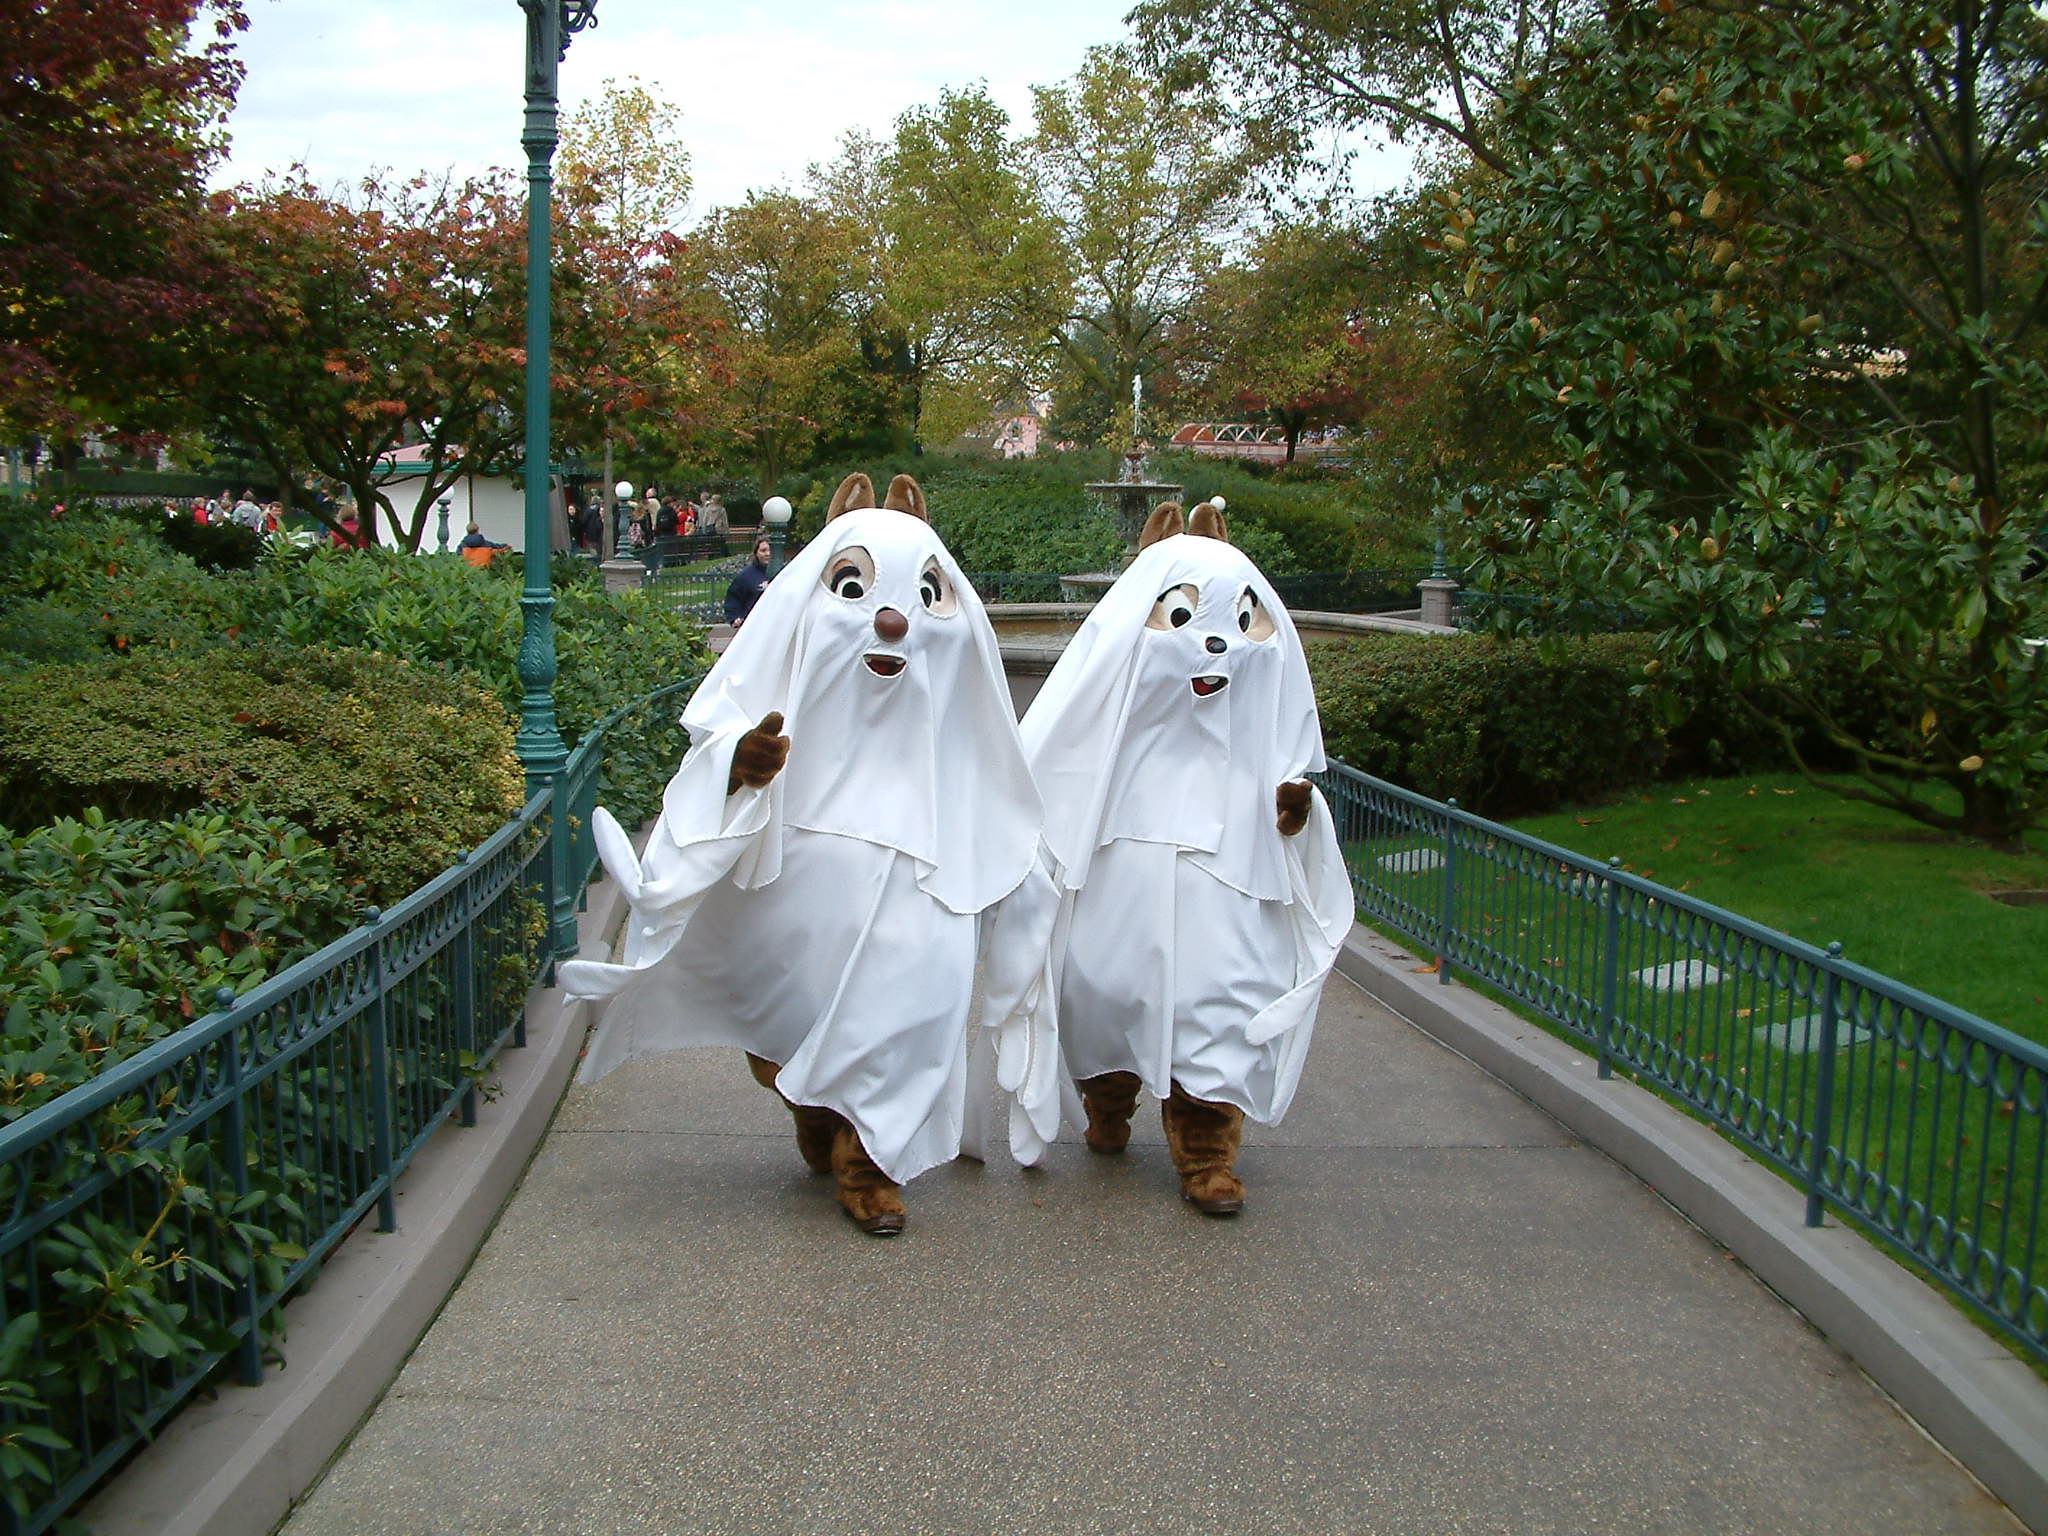 Chip'n'Dale were dressed as ghosts for many years in these outfits, but in 2009 they received new ghosts outfits.